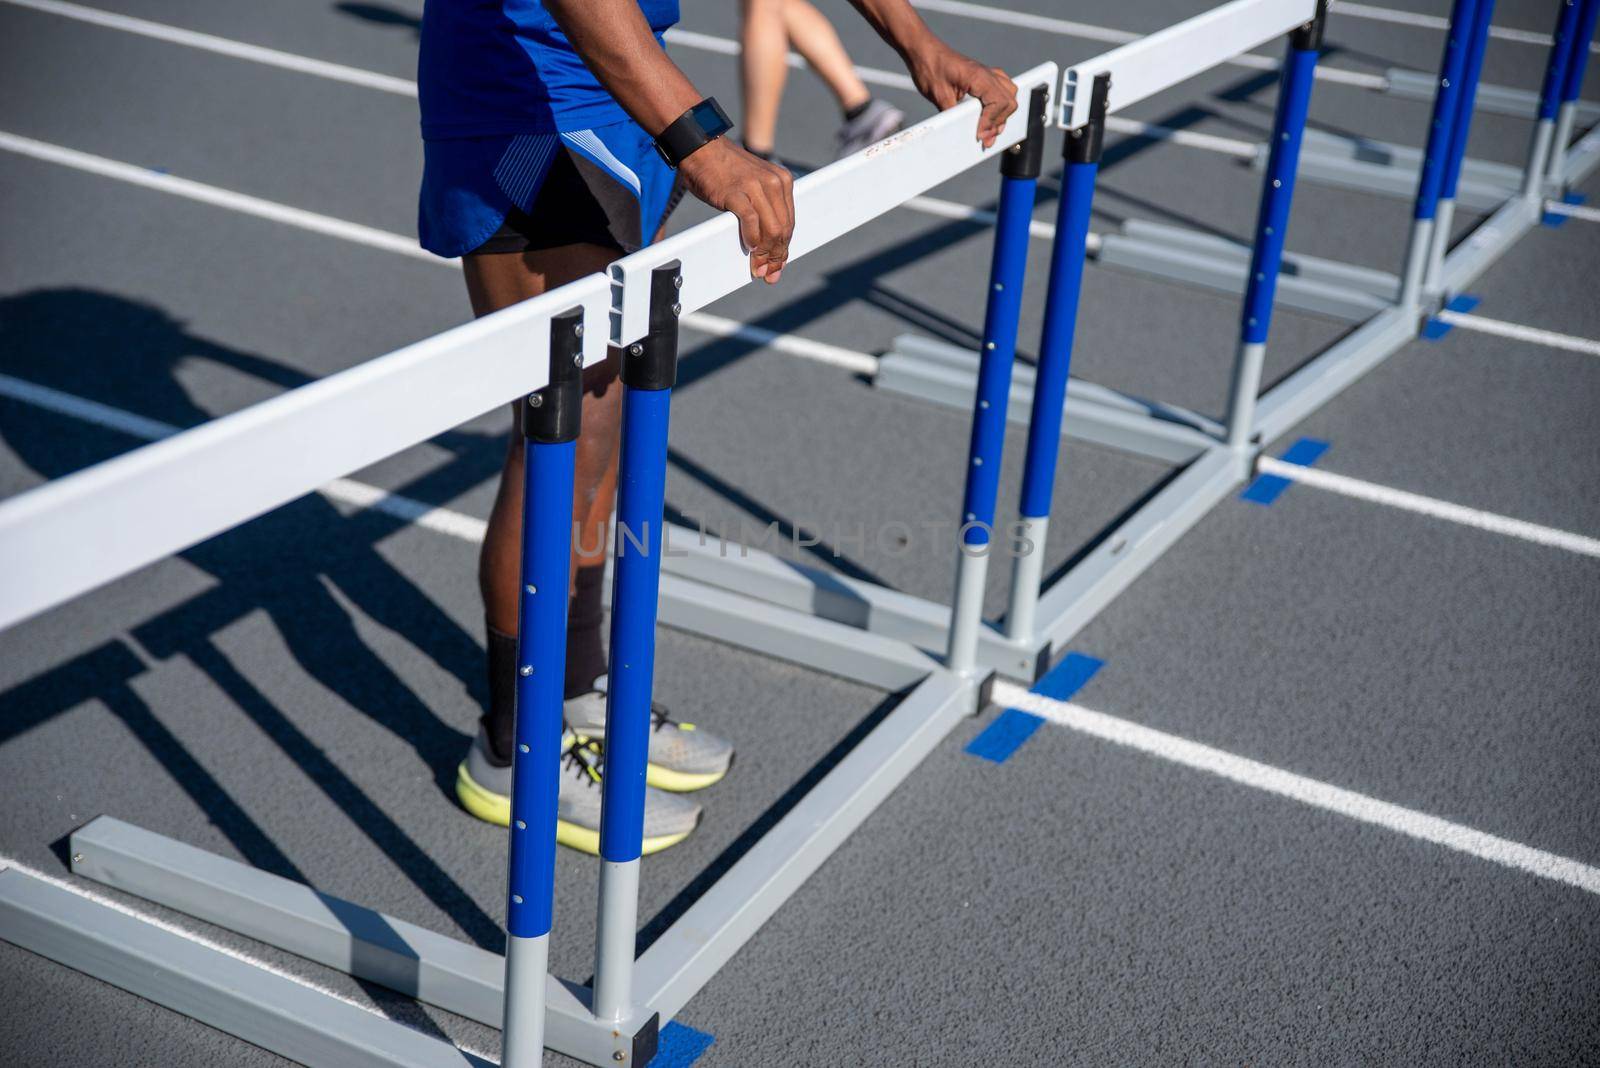 A long row of hurdles blocks the track and one young African American man straightens them. Track is new looking, gray with crisp white lines.